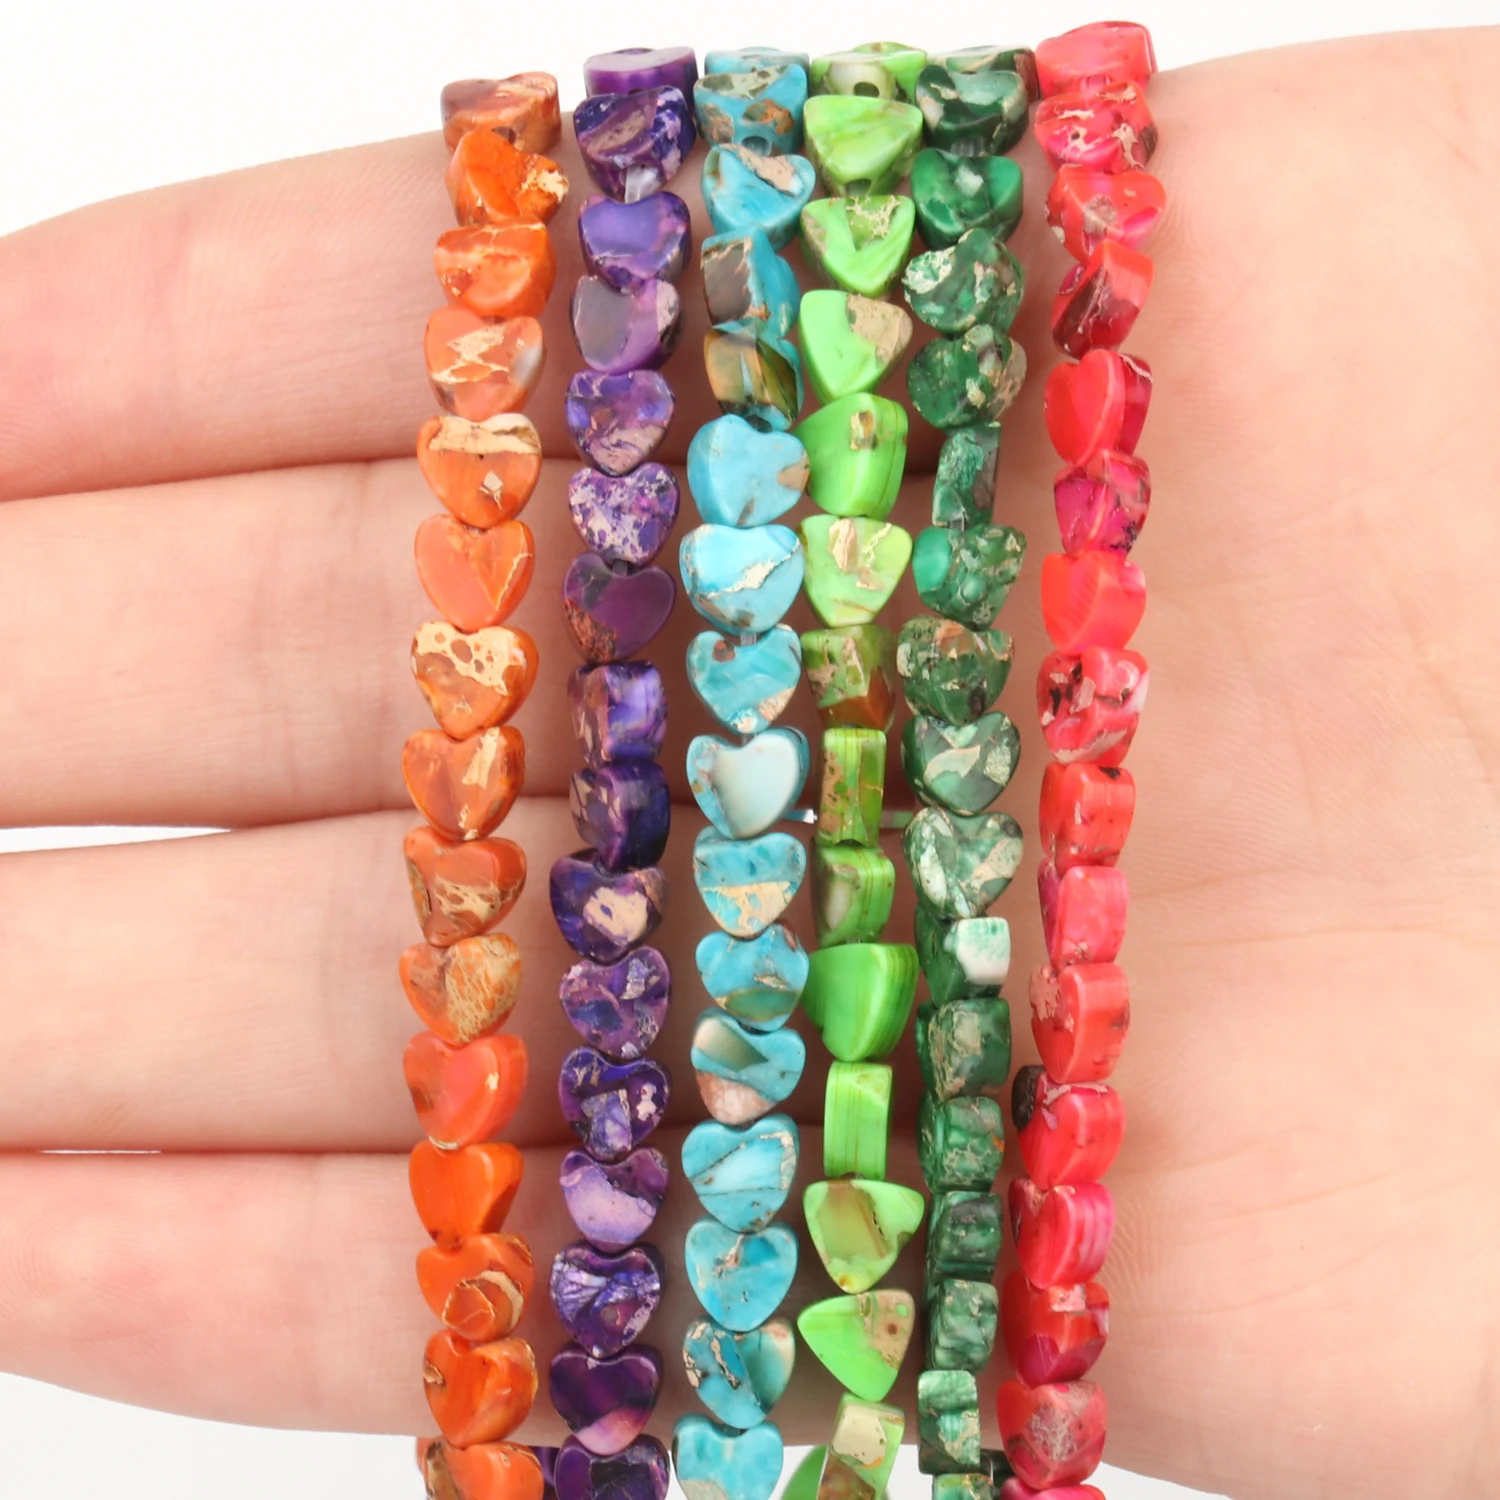 

6x6mm AA Love Heart Shape Sediment Natural Stone Bead Multicolor Loose Beads for Jewelry Making Suppliers DIY Charms Bracelets